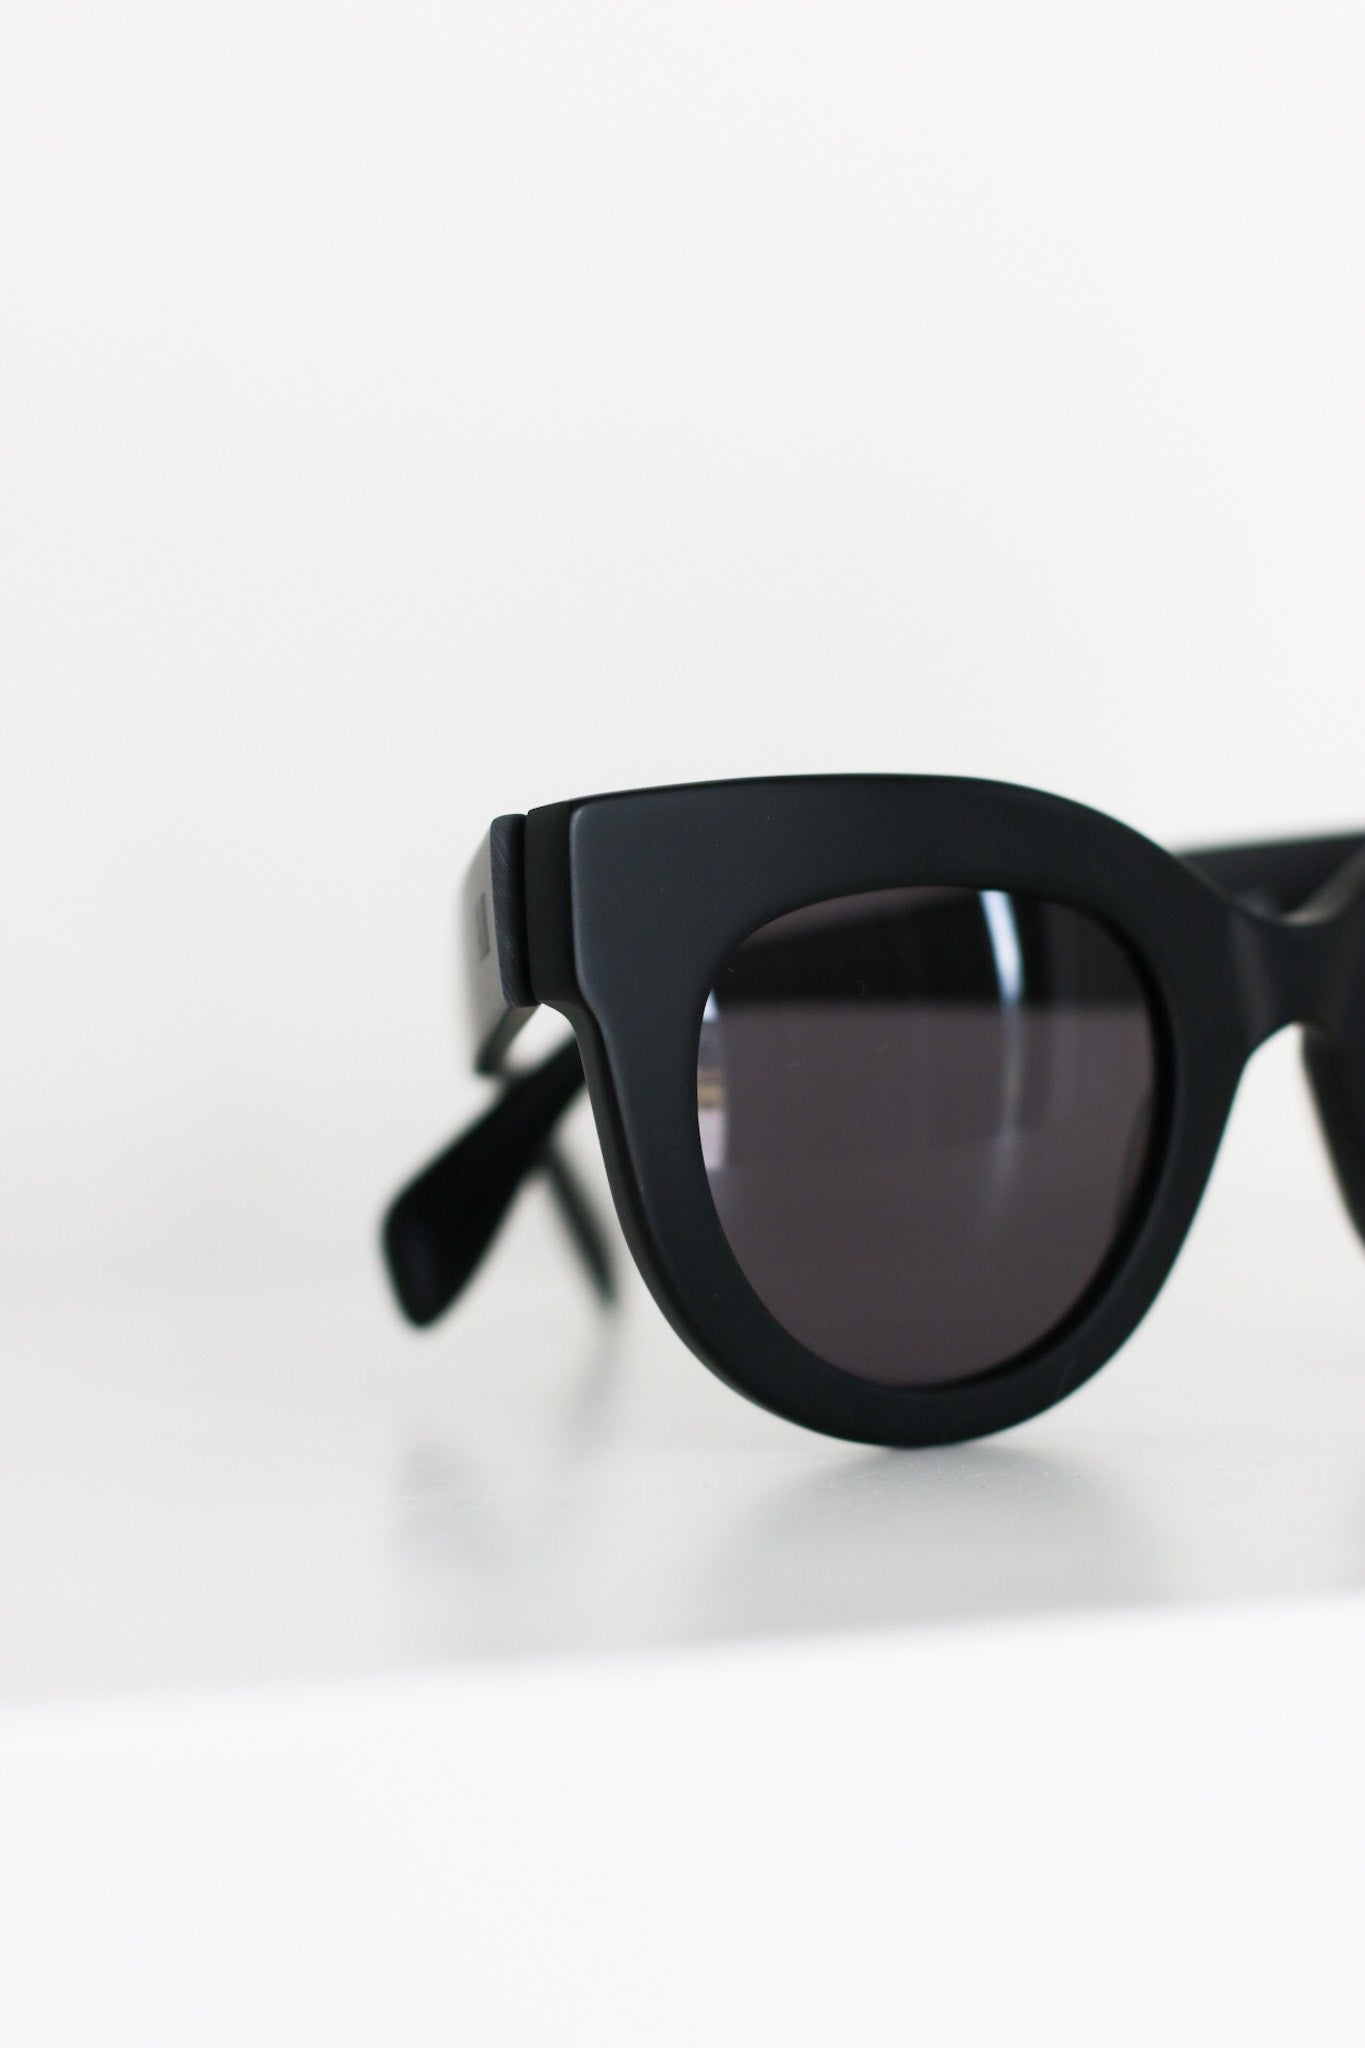 Close-up of Manhattan luxury oversized sunglasses, featuring dark-gray tinted lenses and matte black acetate frames.